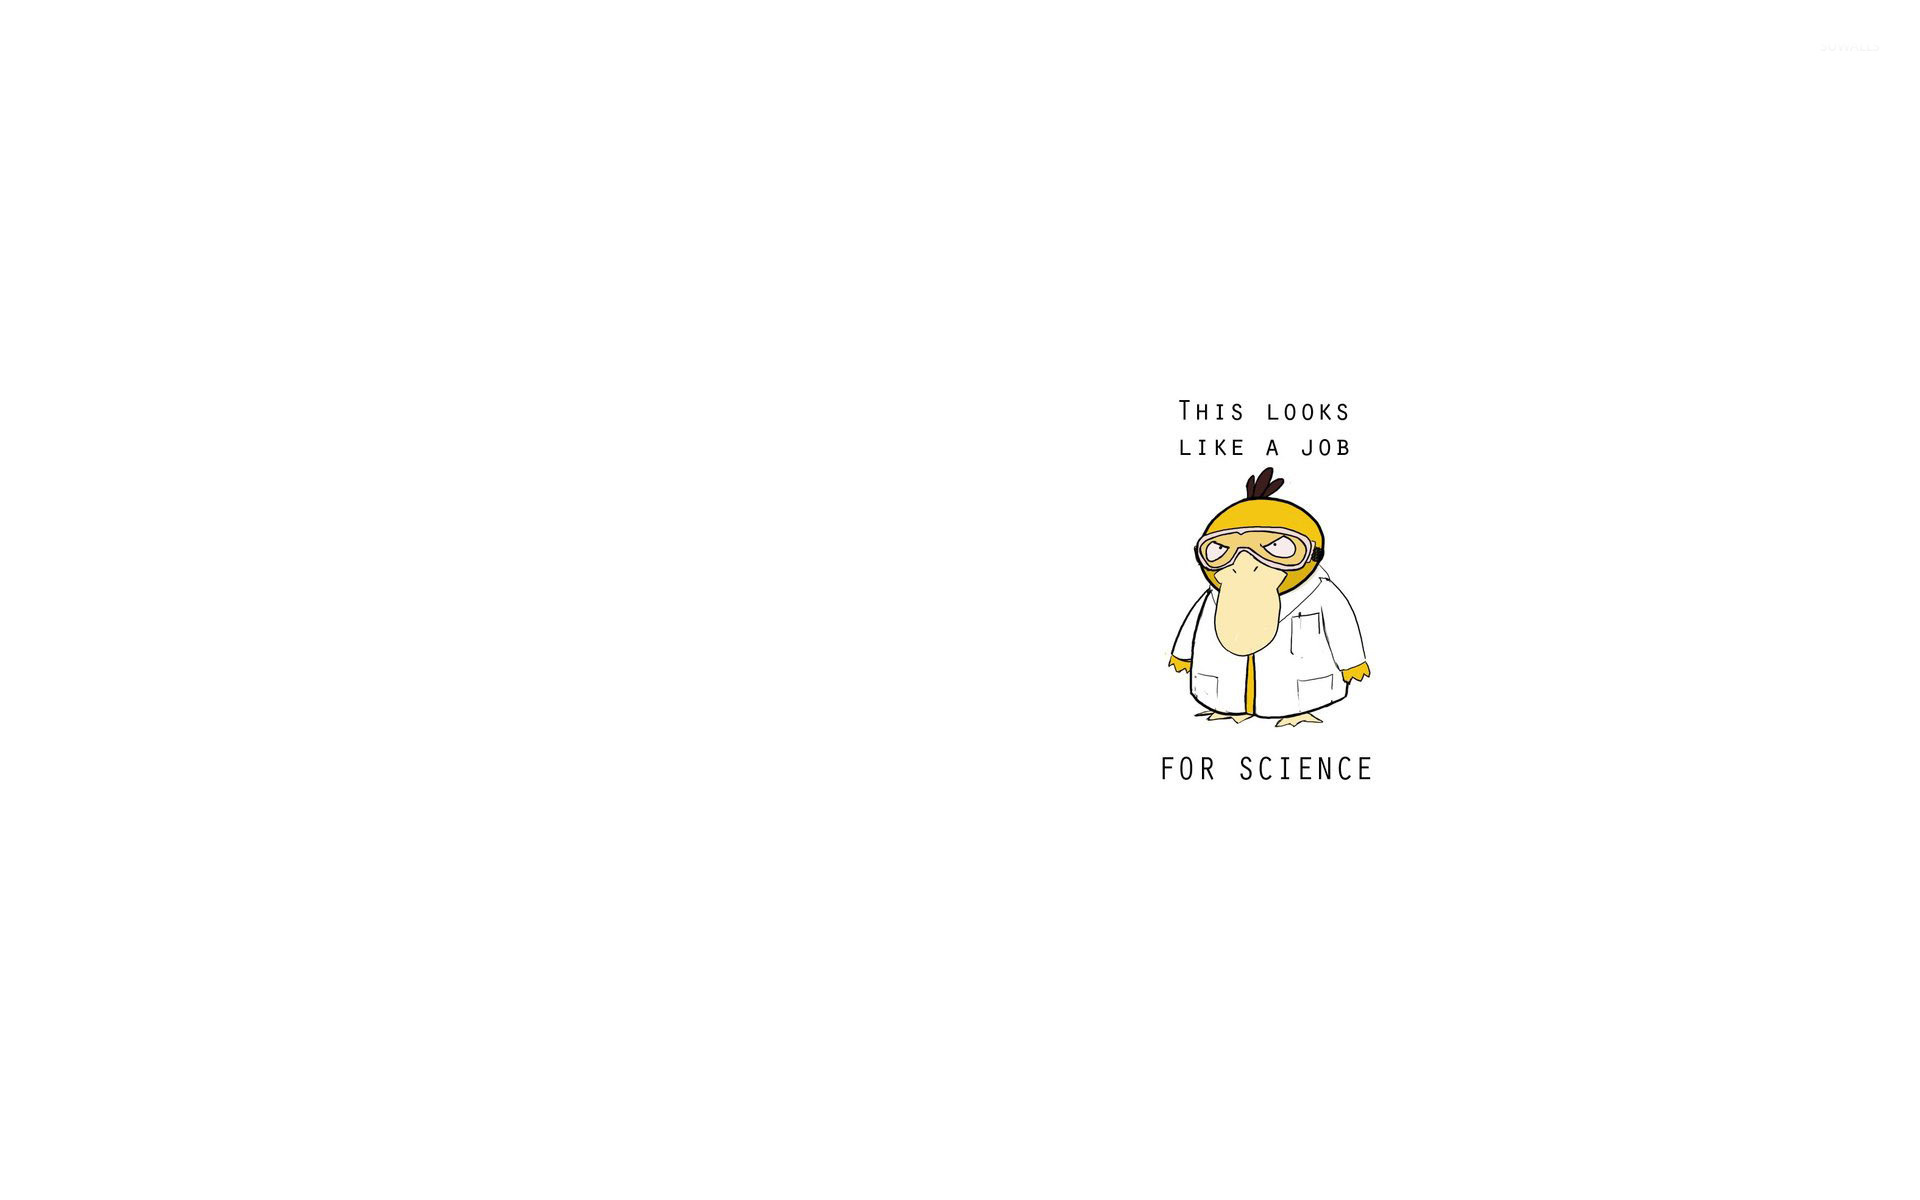 A job for science wallpaper - Funny wallpapers - #27515